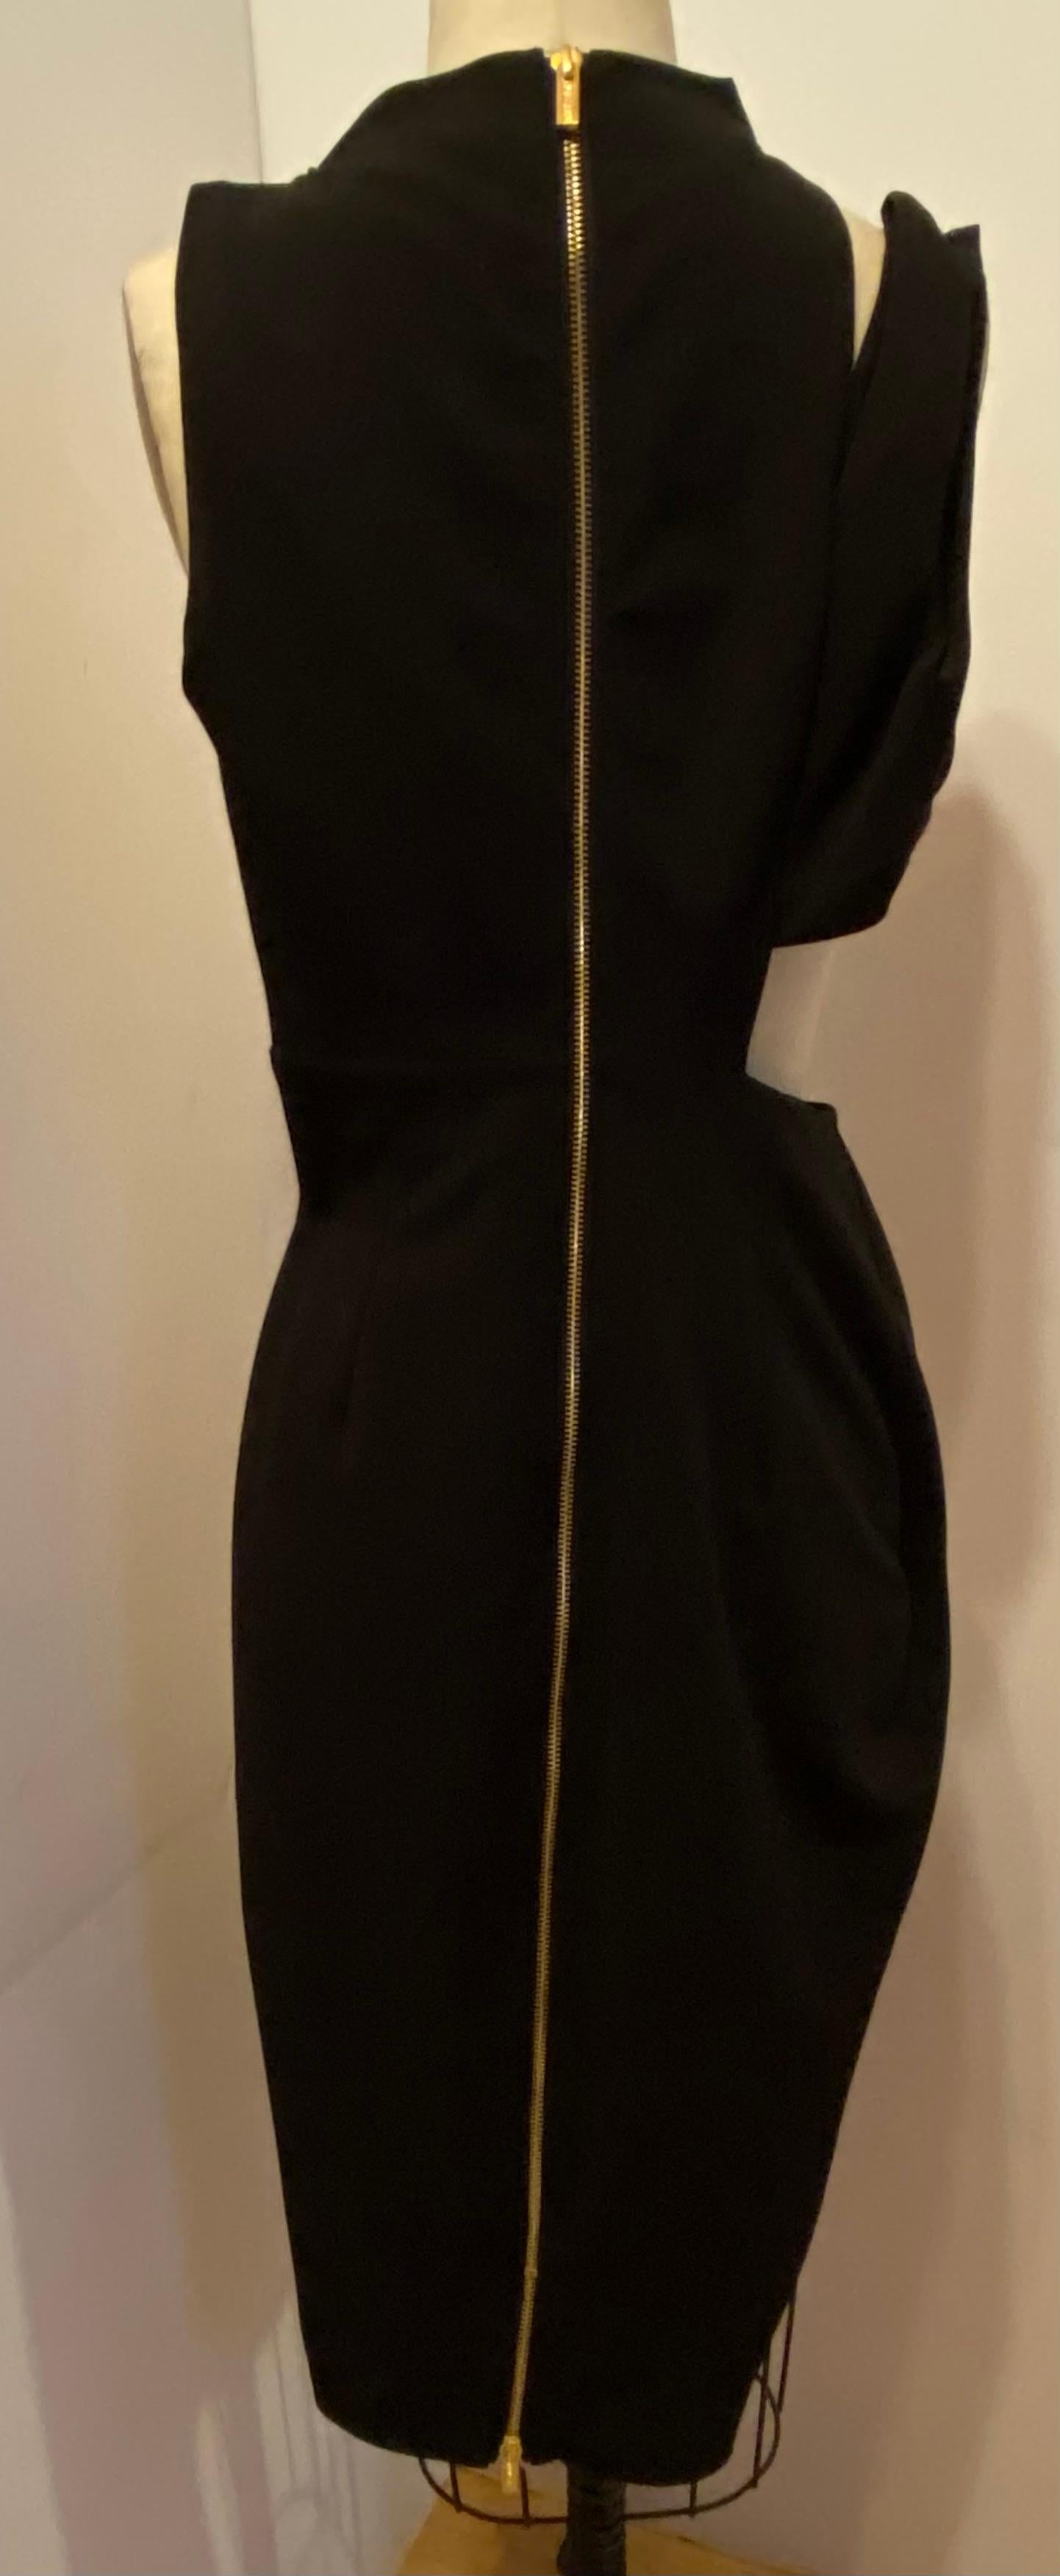 Women's 'House of London' Black Abstract Deconstruct Whimsical Evening Cocktail Dress For Sale